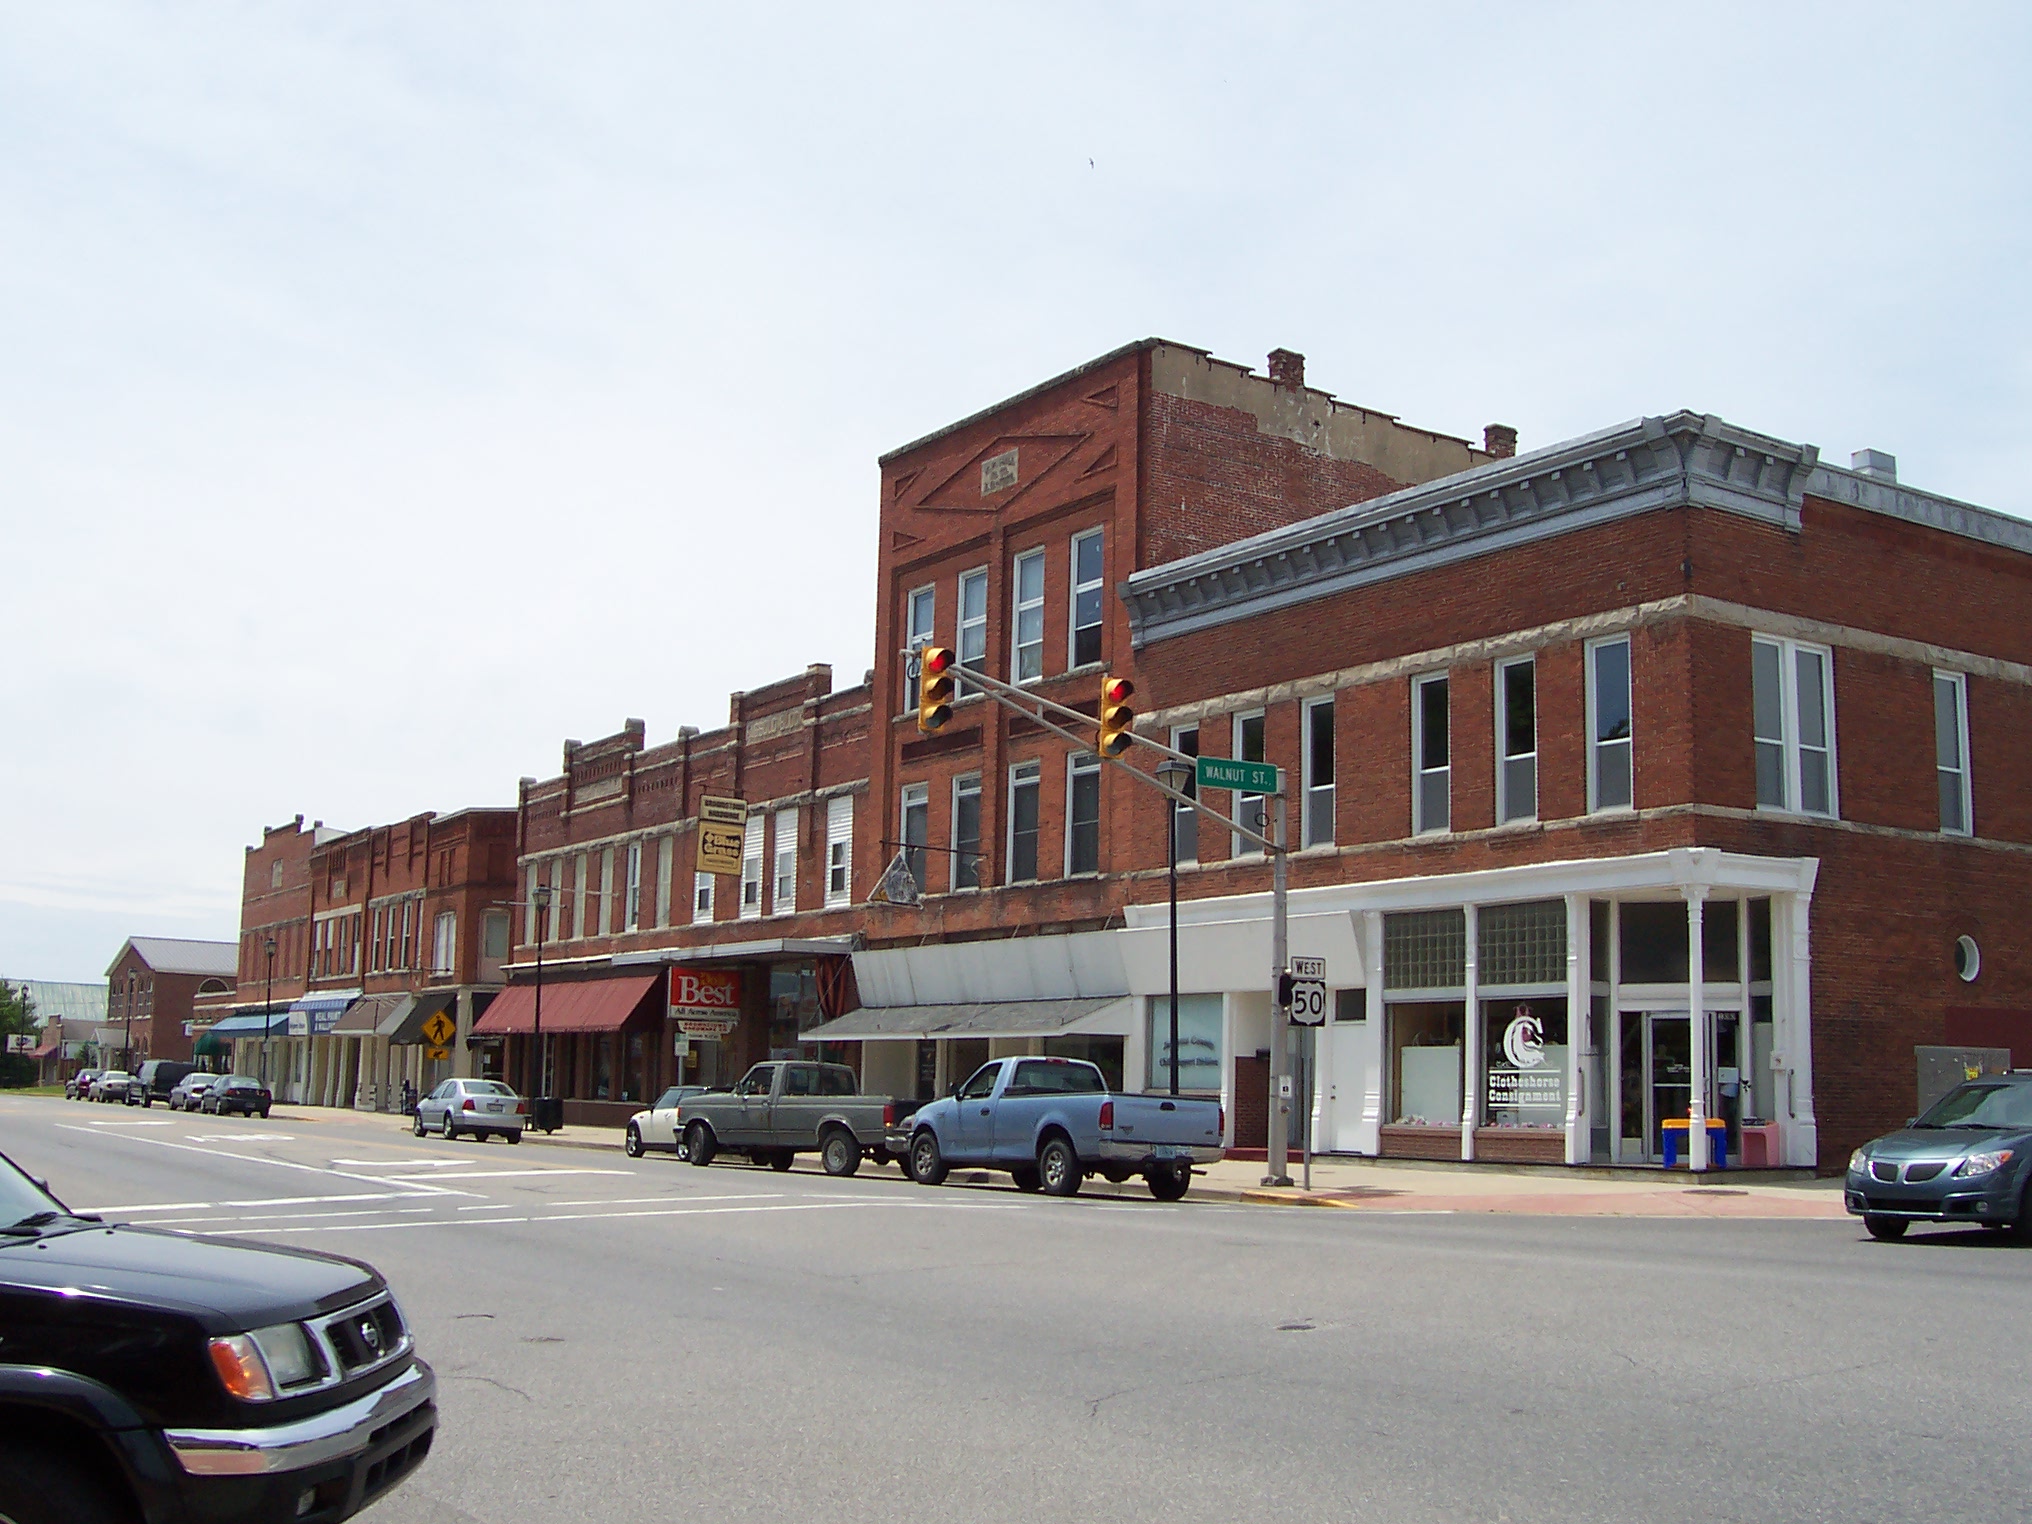 Brownstown, Indiana